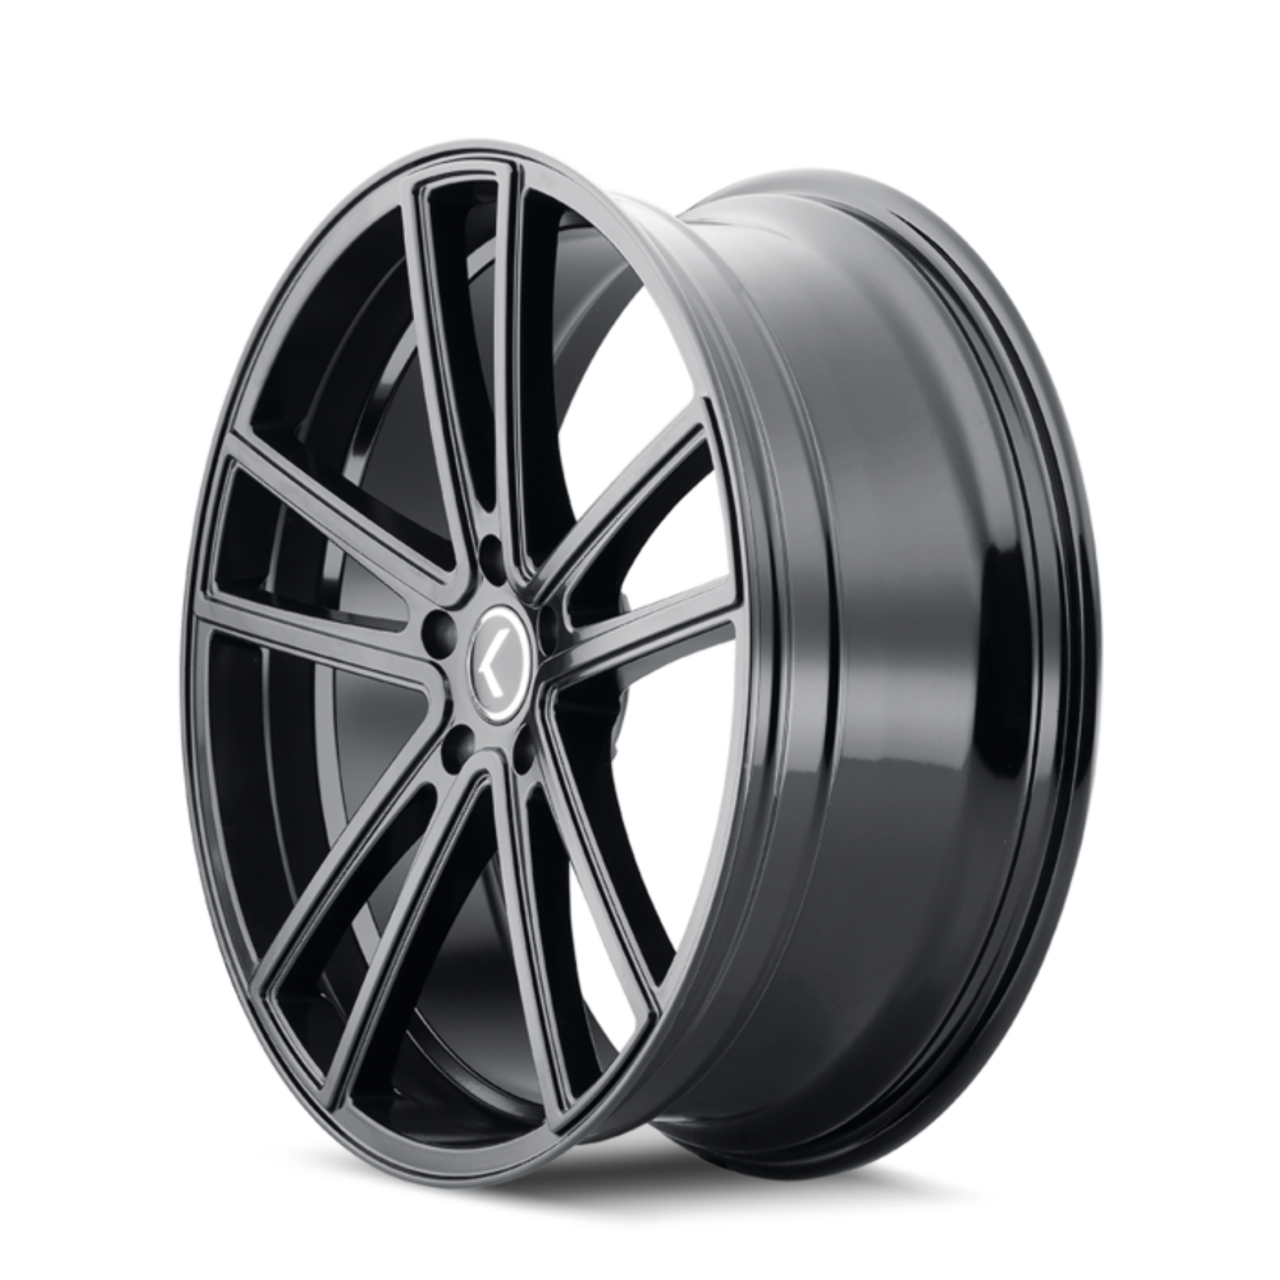 Set 4 20" Kraze Lusso 20x8.5 Gloss Black 5x4.5 Wheels 38mm For Jeep Ford Rims